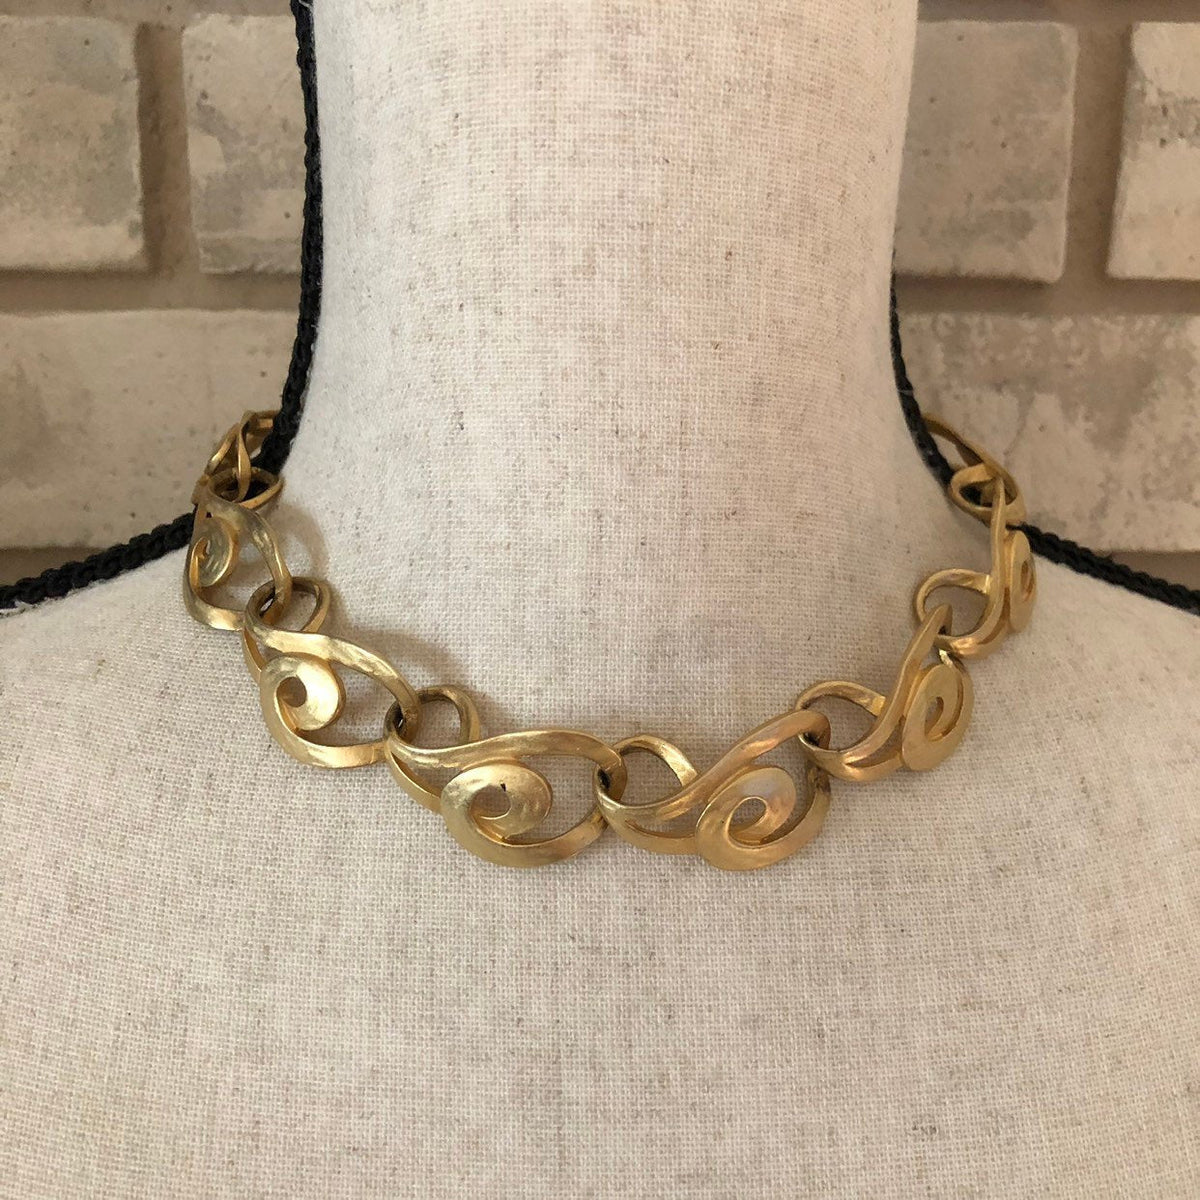 Vintage Erwin Pearl Classic Gold Link Necklace - 24 Wishes Vintage Jewelry